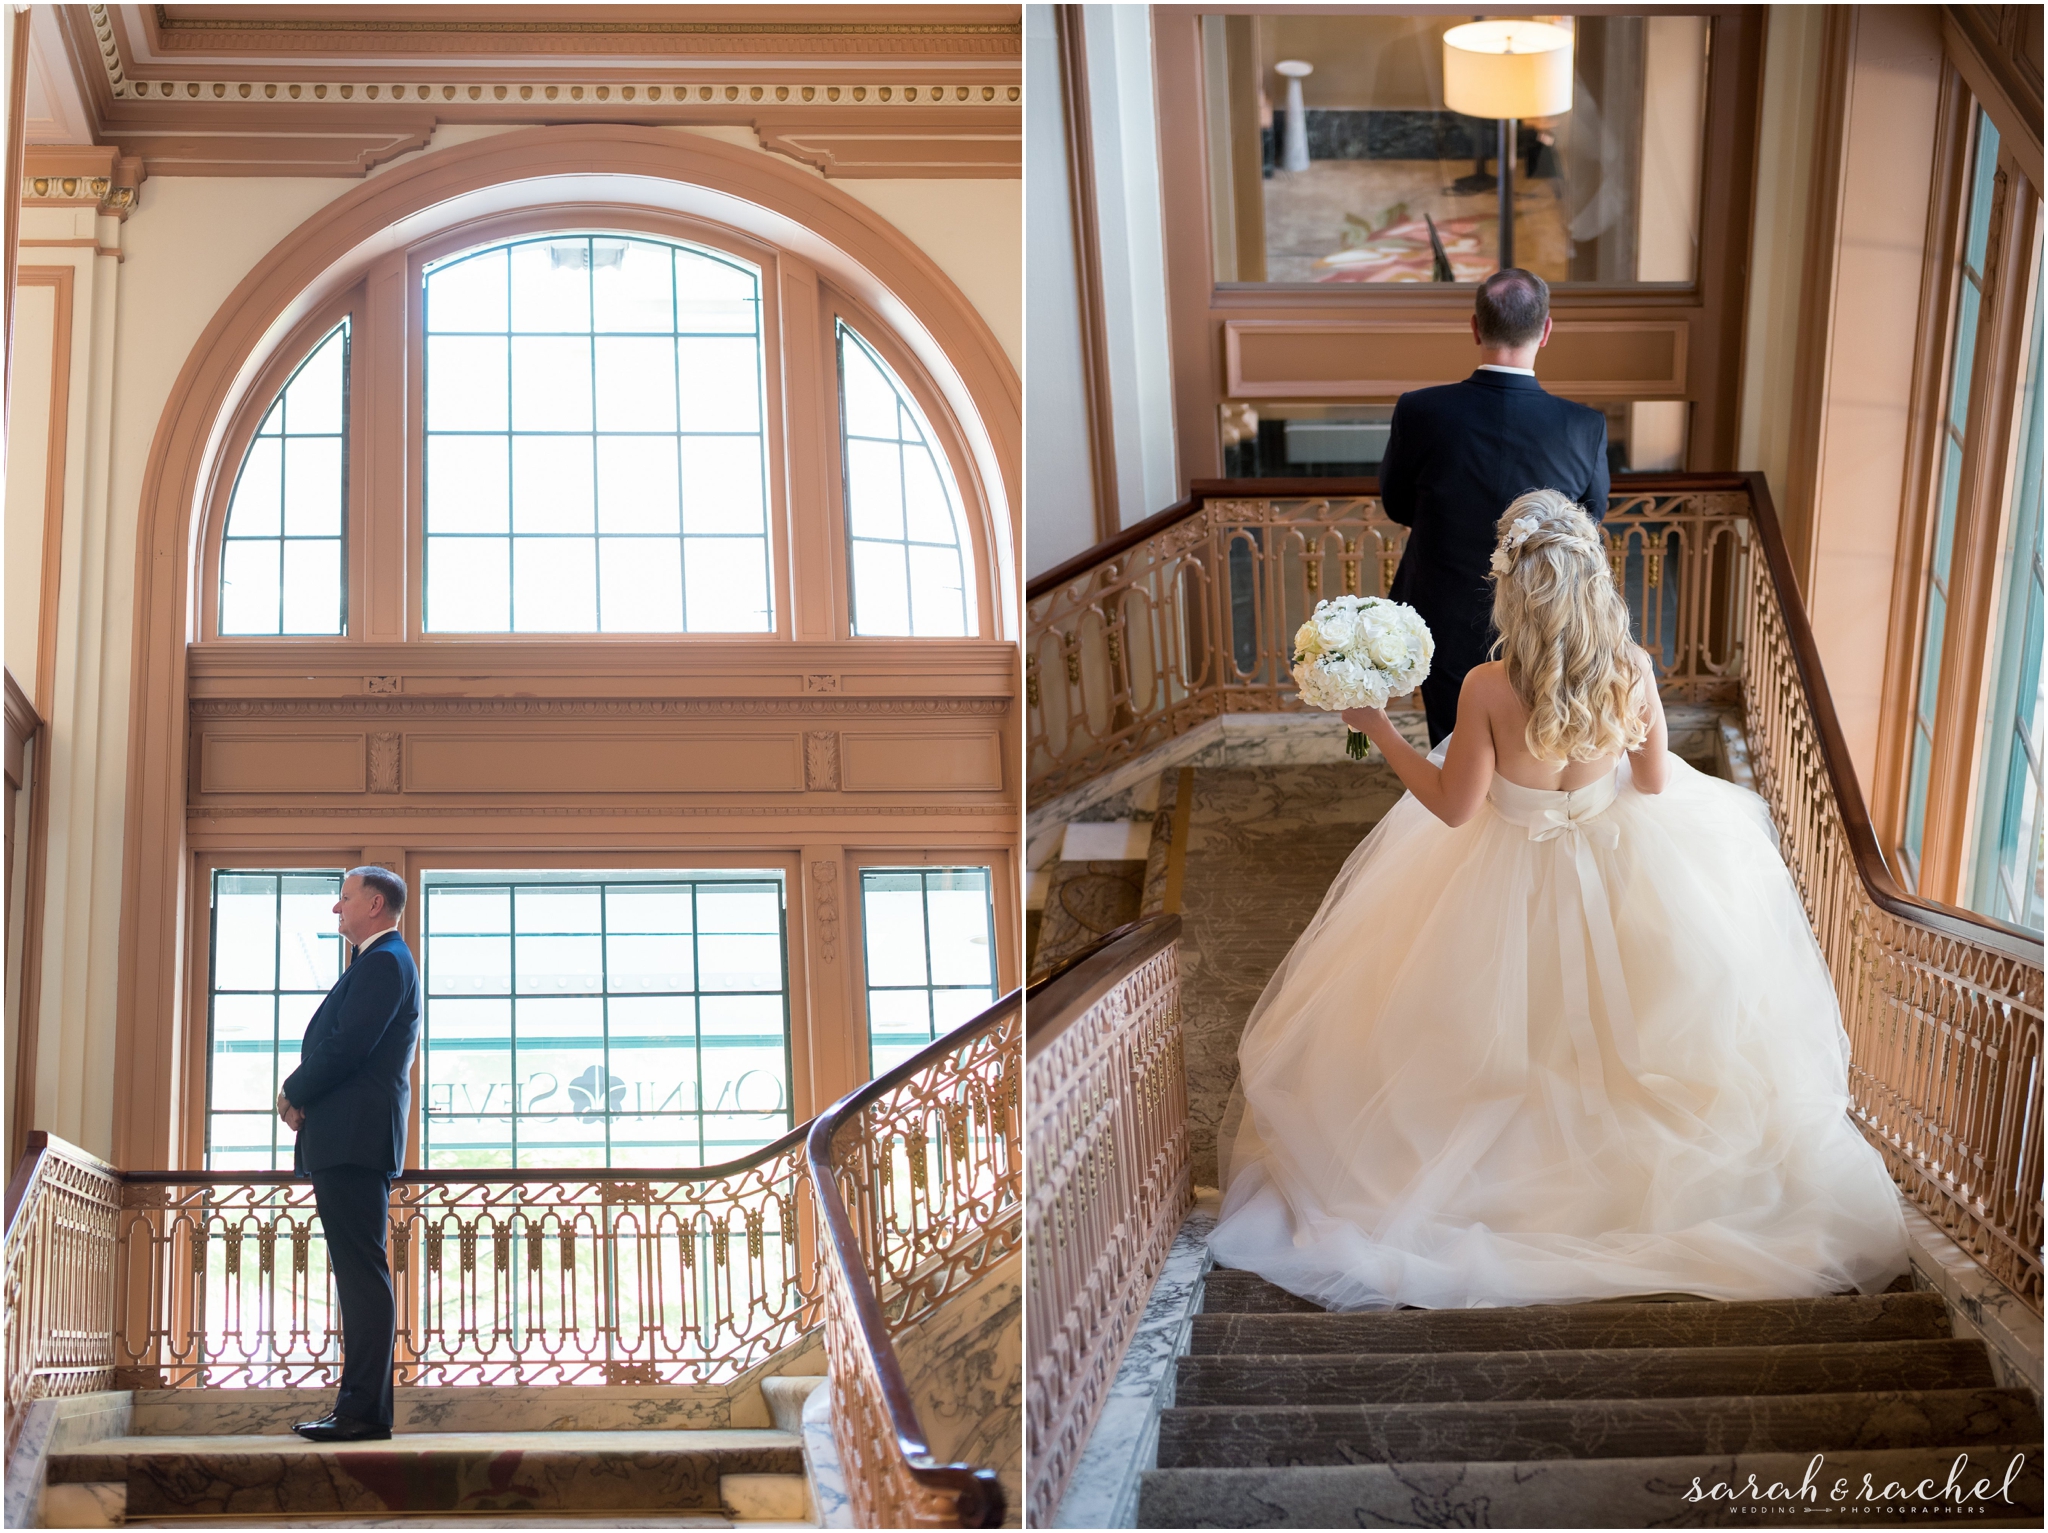 Chris & Jillian | Indianapolis wedding | Omni Severin Hotel | father daughter first look